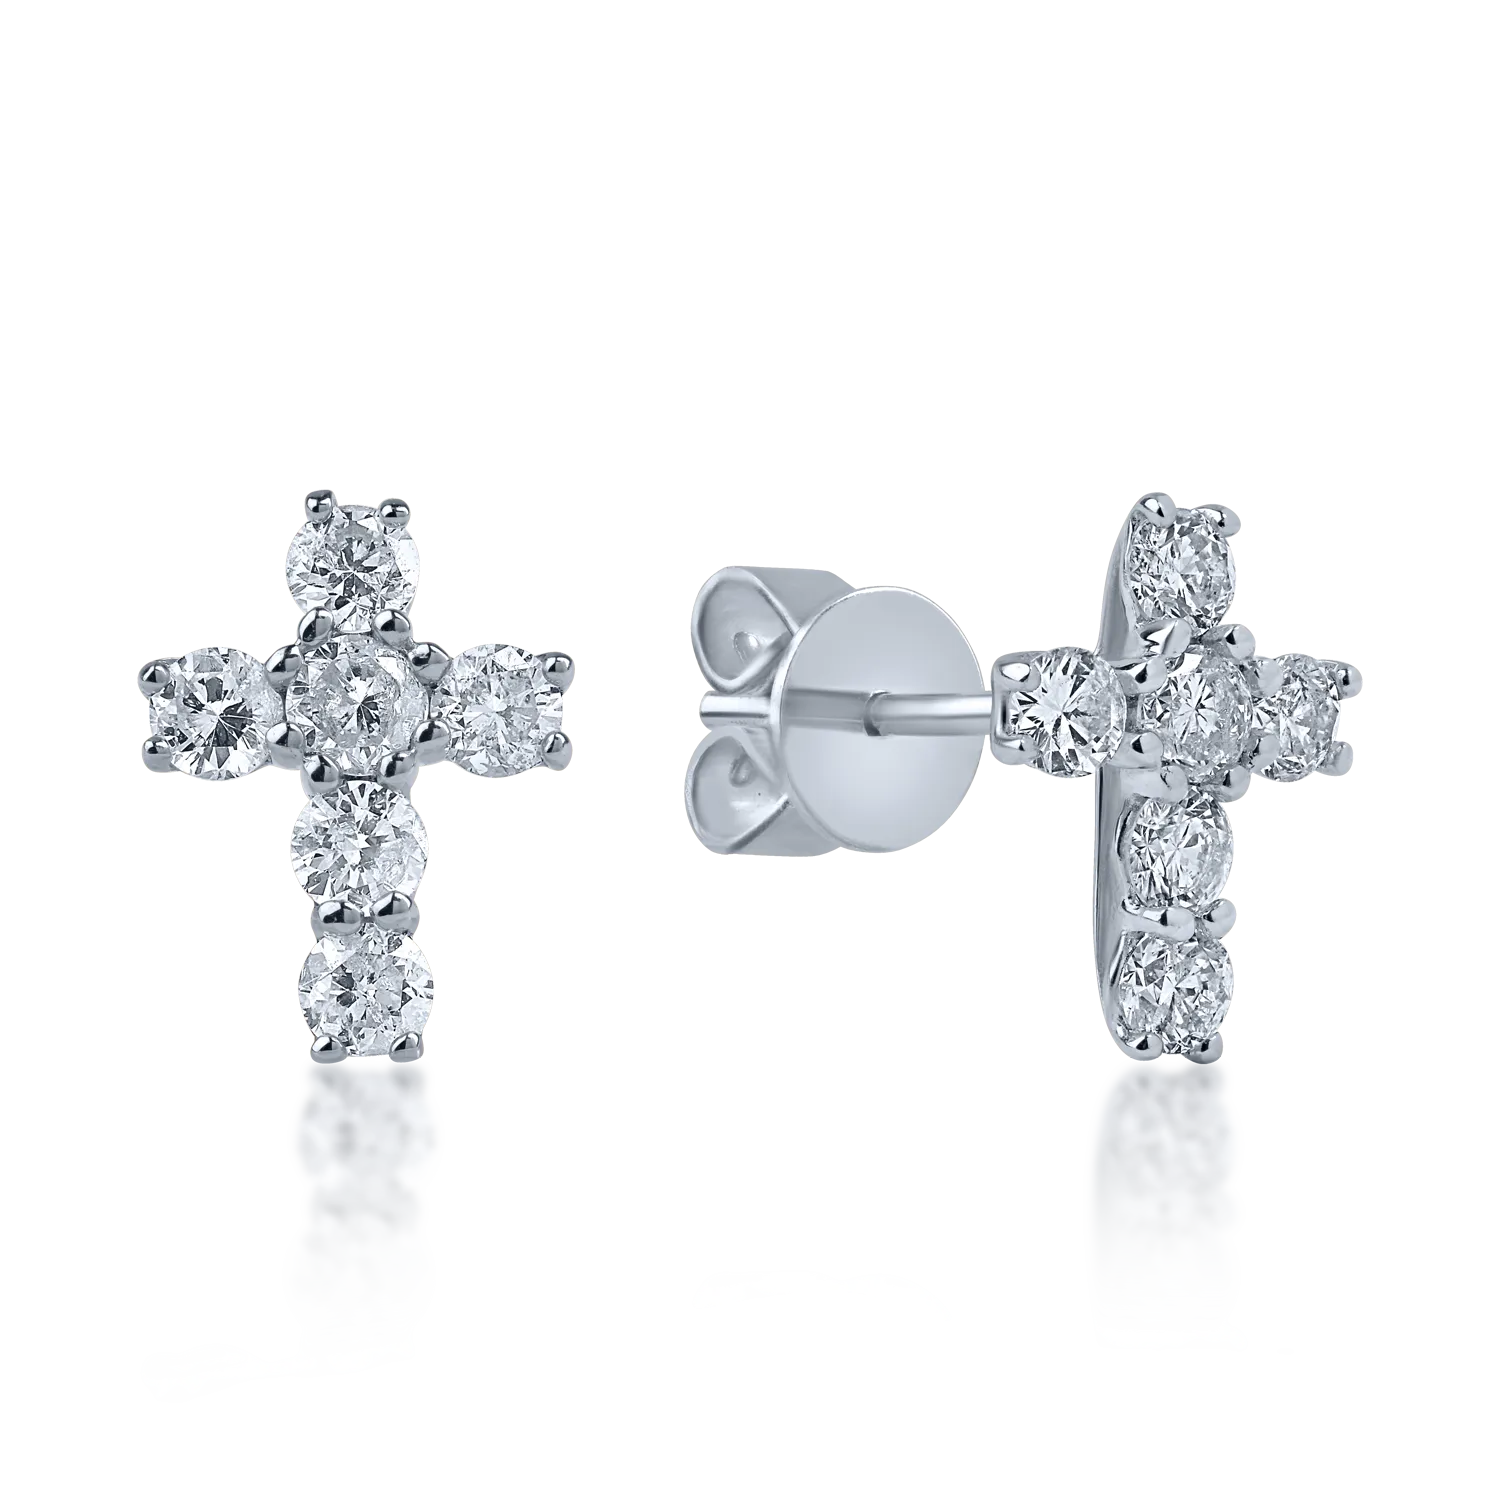 White gold cross earrings with 0.36ct diamonds